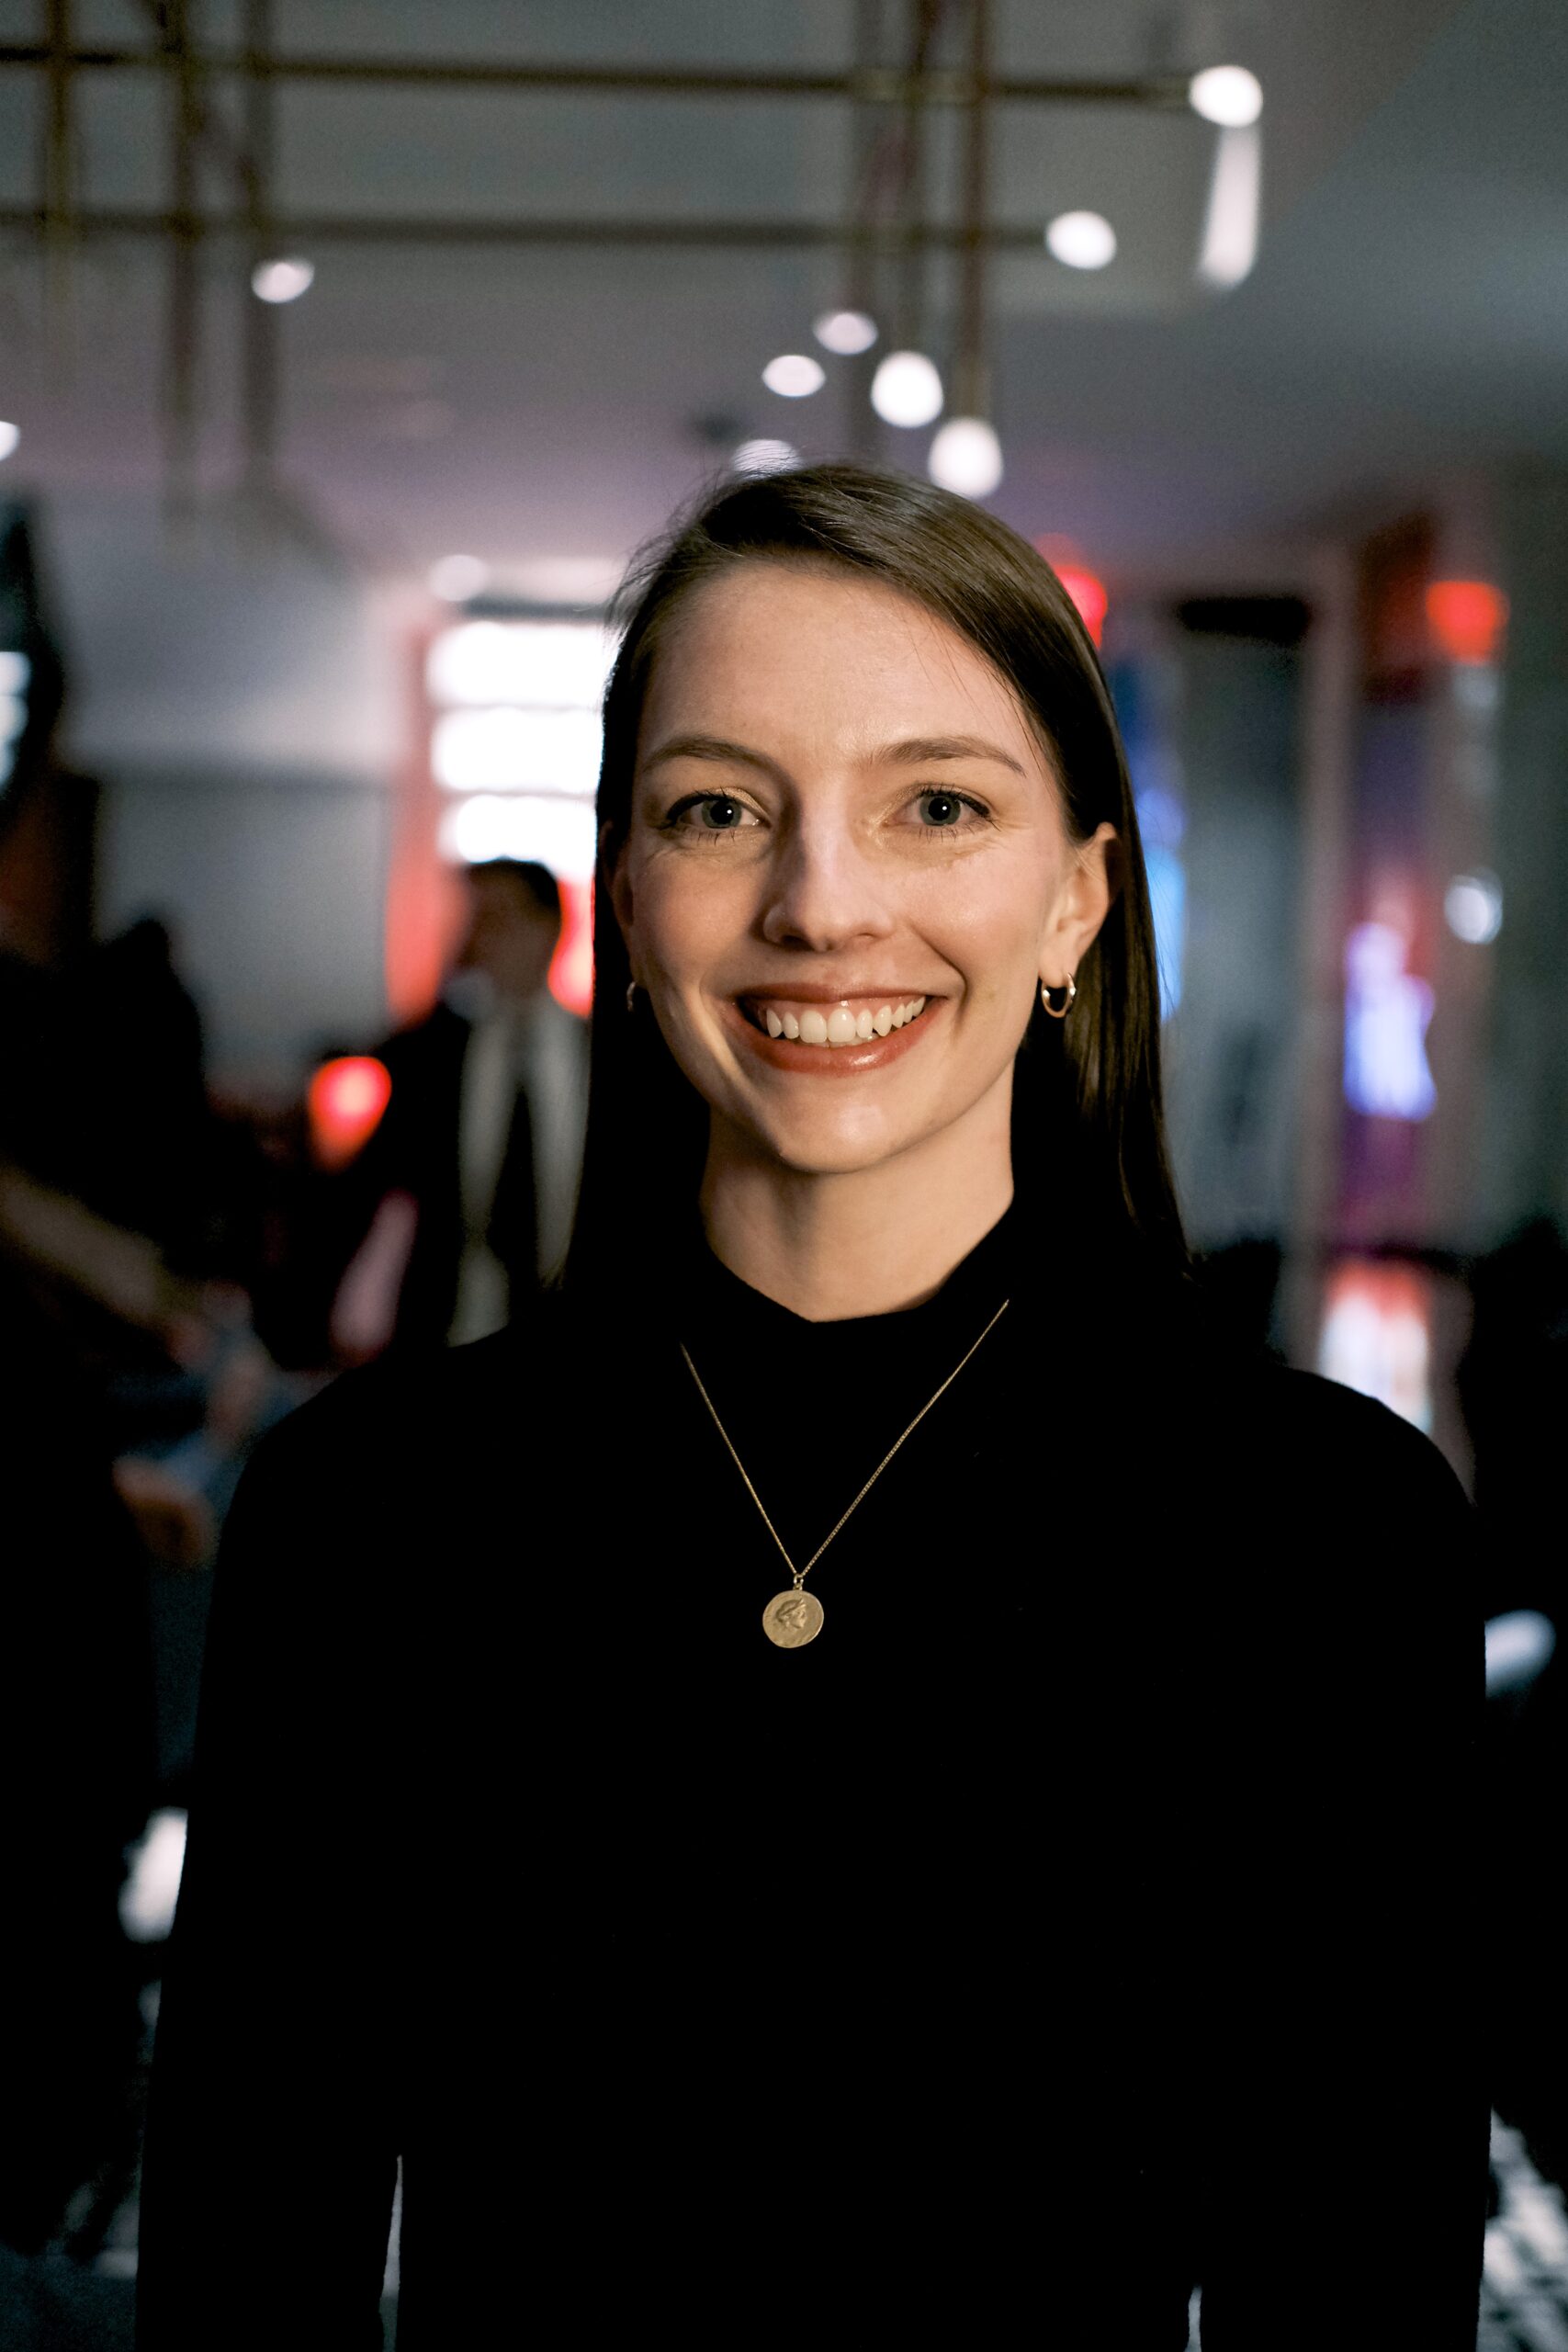 Headshot of Kirby Eule standing wearing black shirt and necklace with lights in the background.